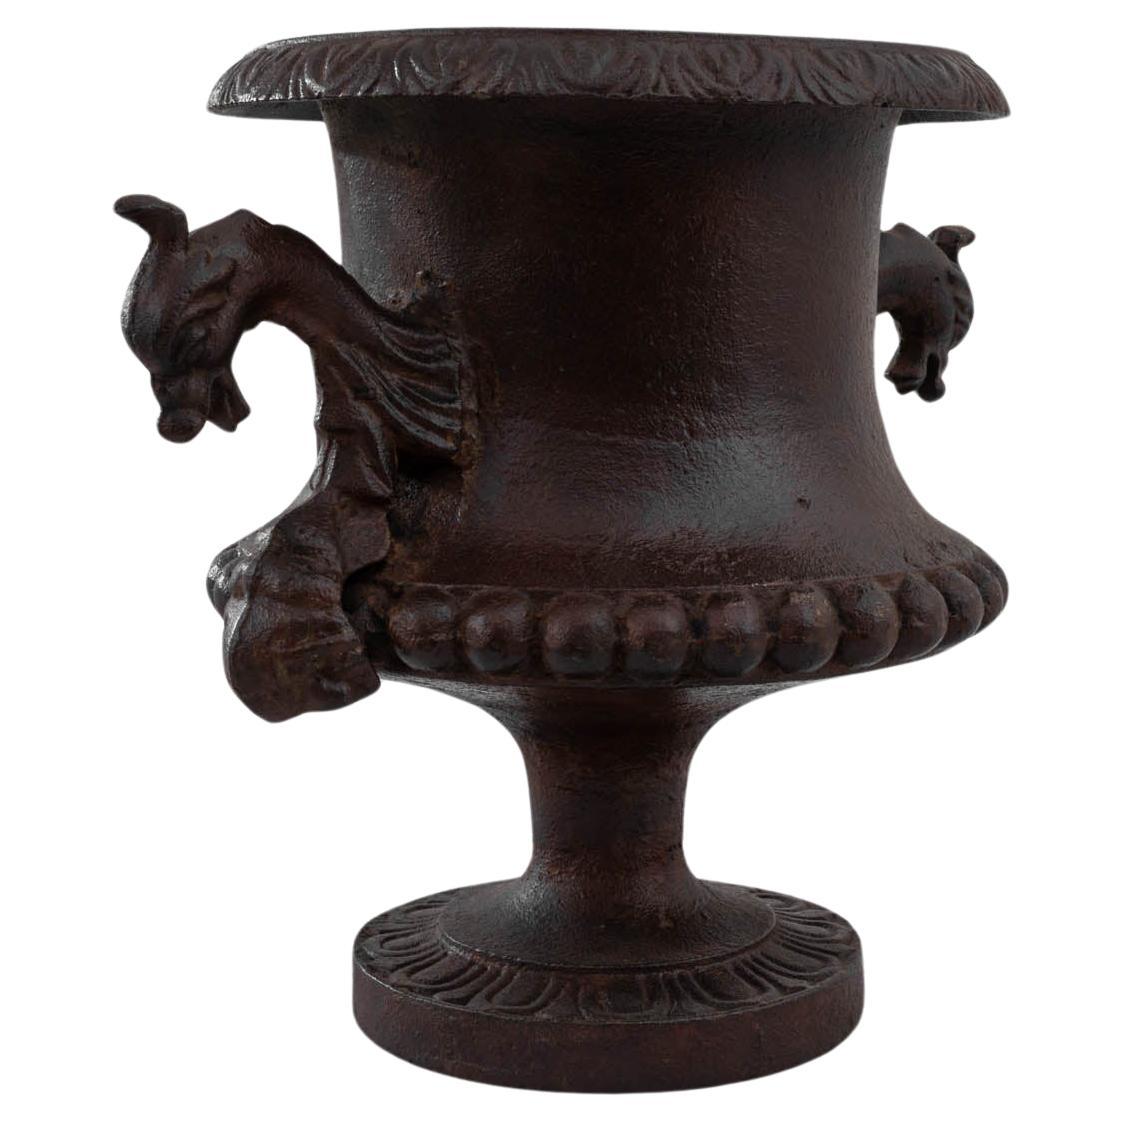 A cast iron planter from France, made in the 1900s. The campana shape resembled an upturned bell with a fluted cupola and broad lip, reminiscent of an opening blossom. Weathered over the years, the cast iron has acquired a striking layered patina: